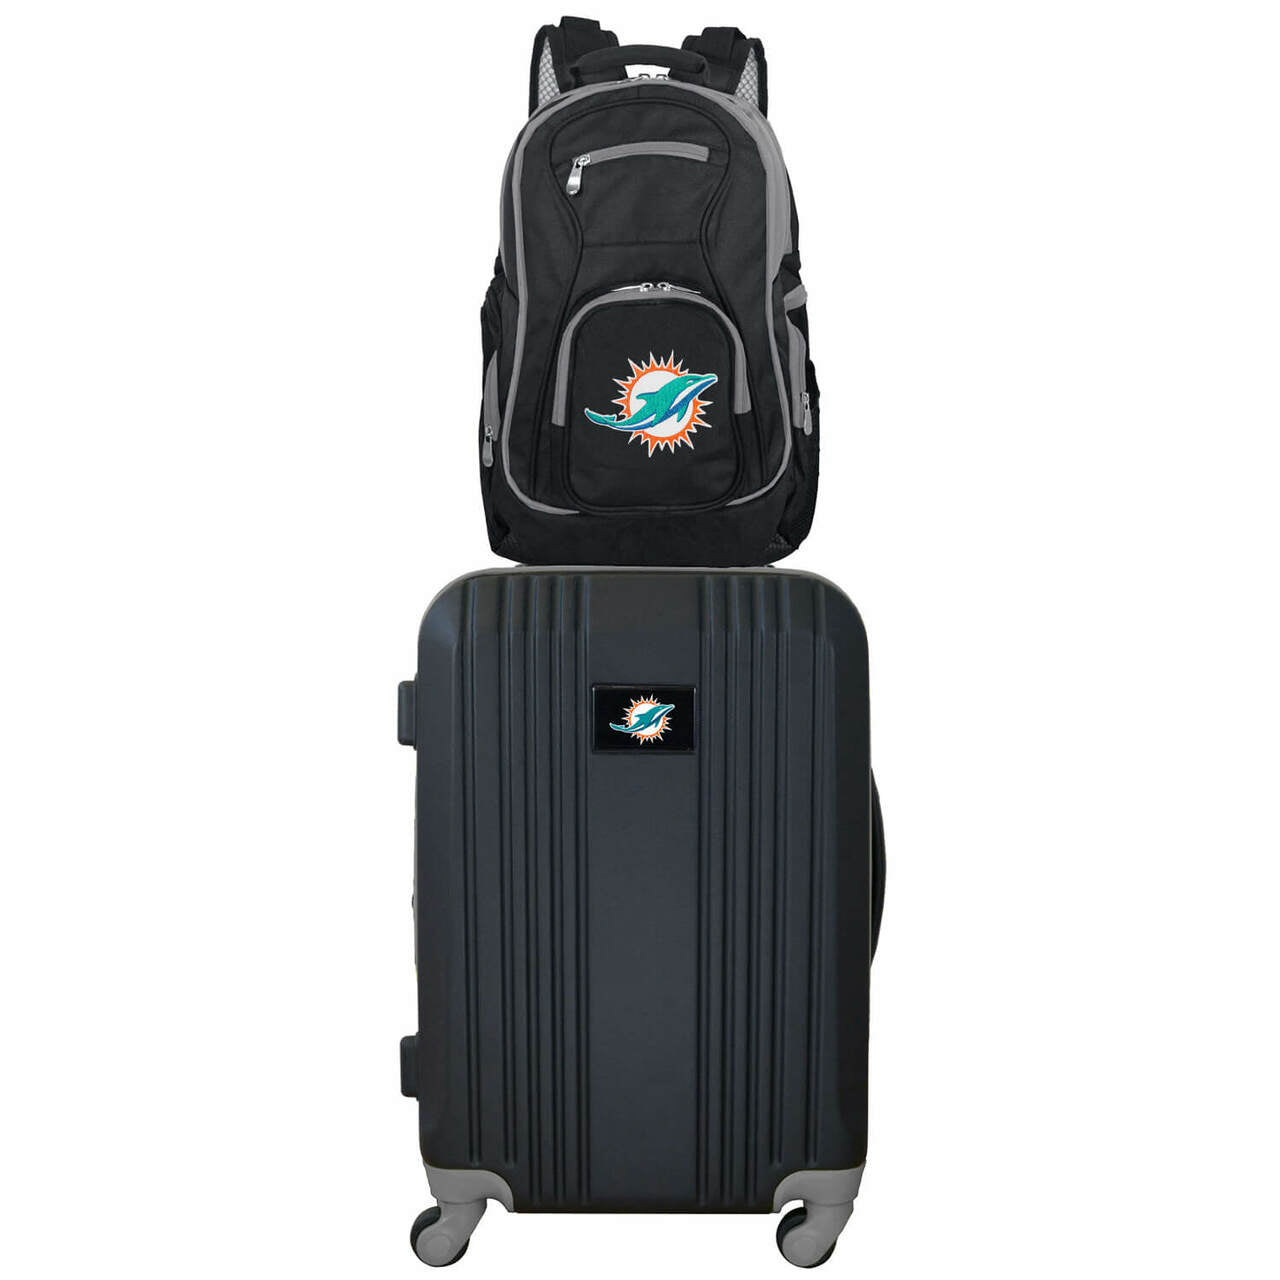 Miami Dolphins 2 Piece Premium Colored Trim Backpack and Luggage Set